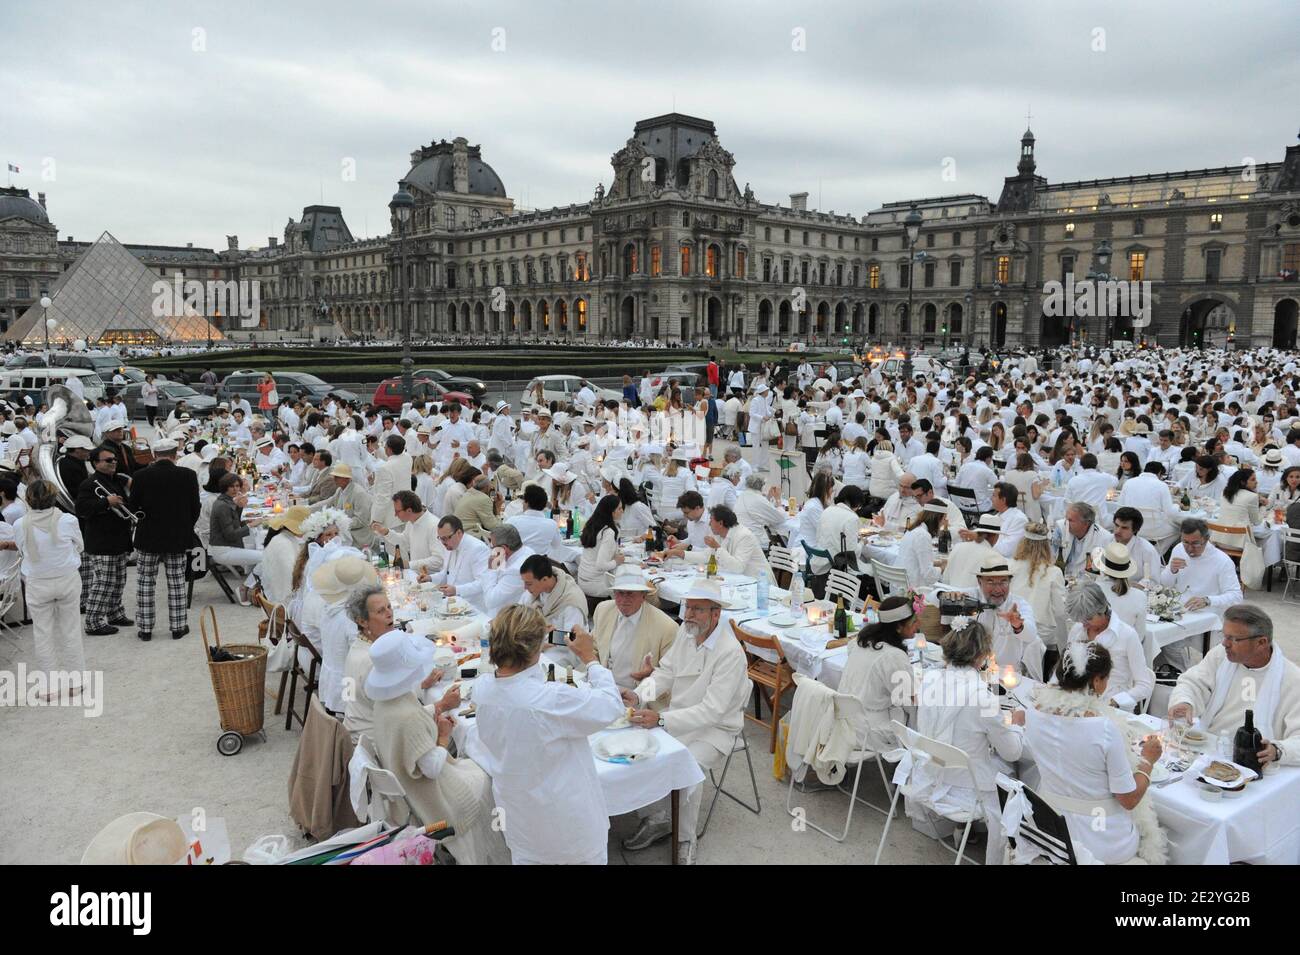 Participants take part in a big open air 'white dinner' between the Louvre  museum and the Jardin des Tuileries in Paris, on June 17, 2010. Hundreds of  people descend on one area